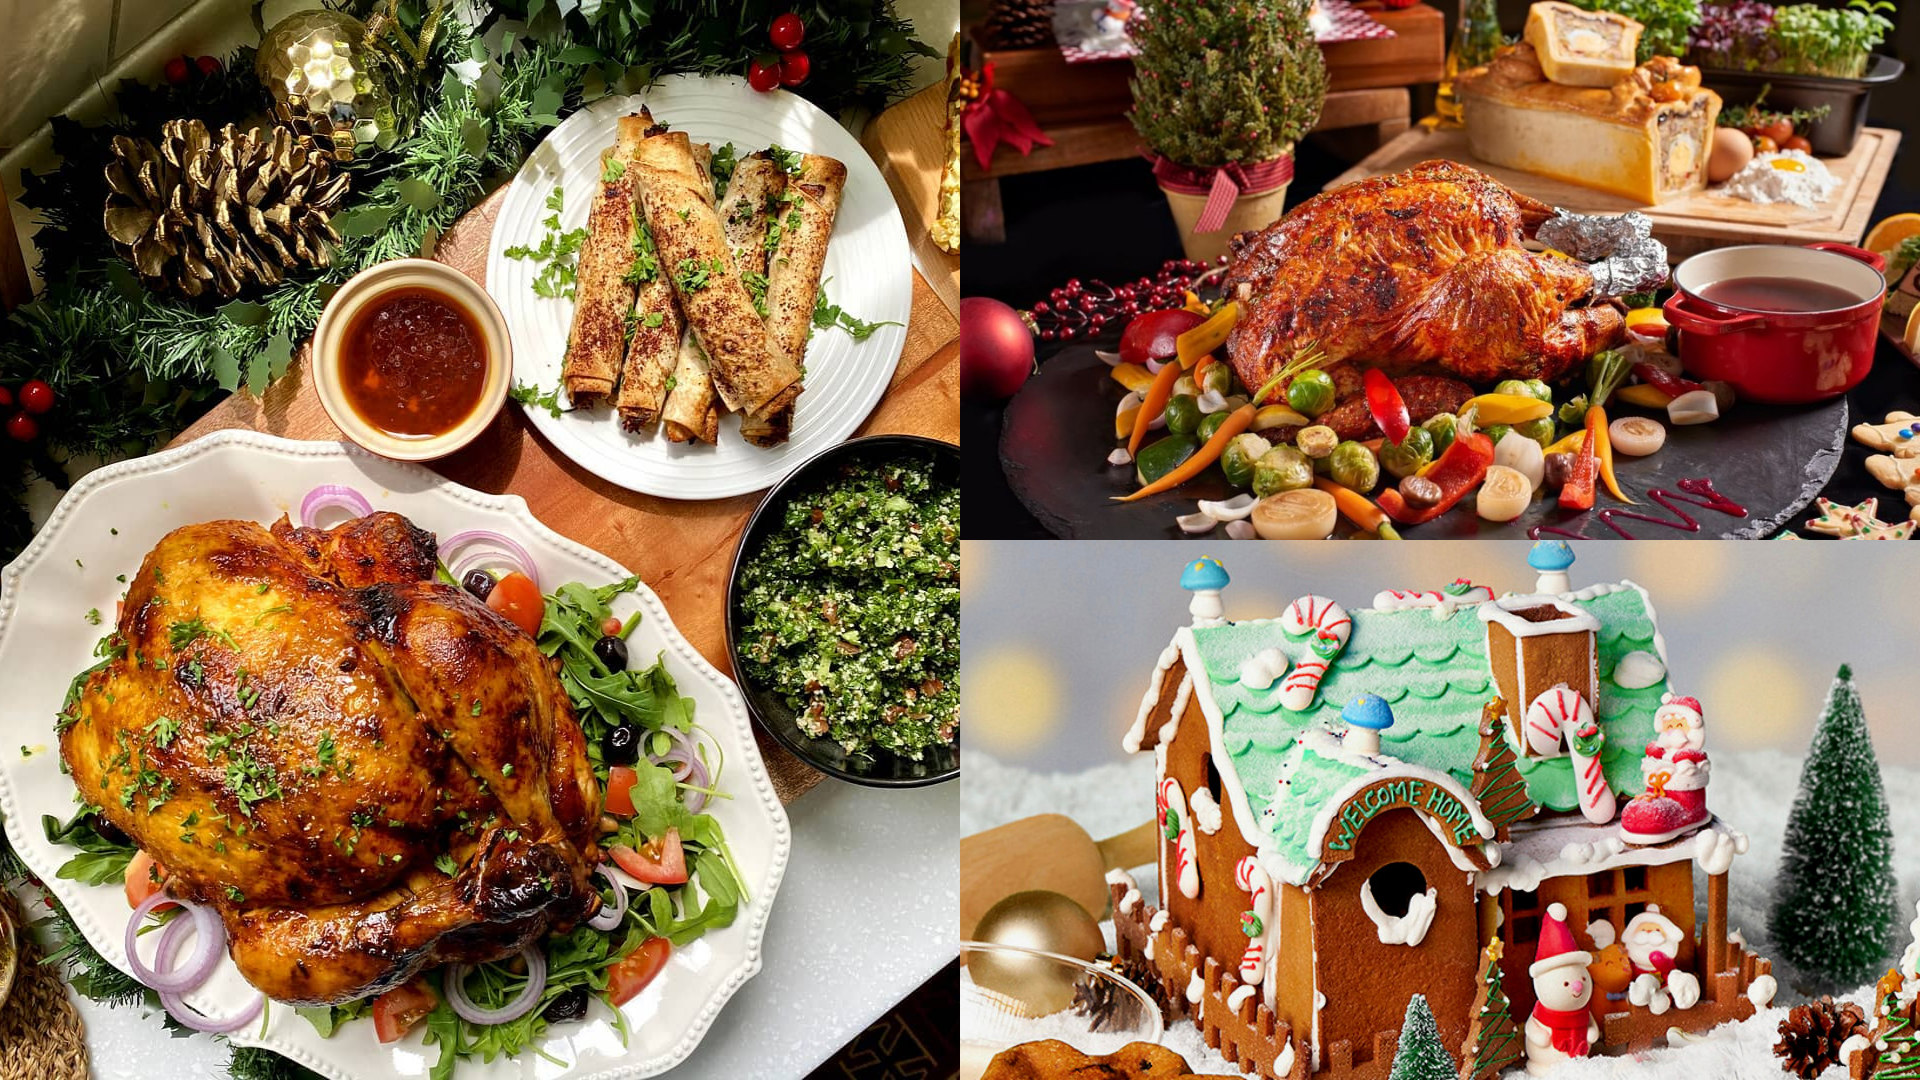 9 Restaurants In Kl To Get Your Turkey And Festive Dishes For Christmas 2020 Klook Travel Blog